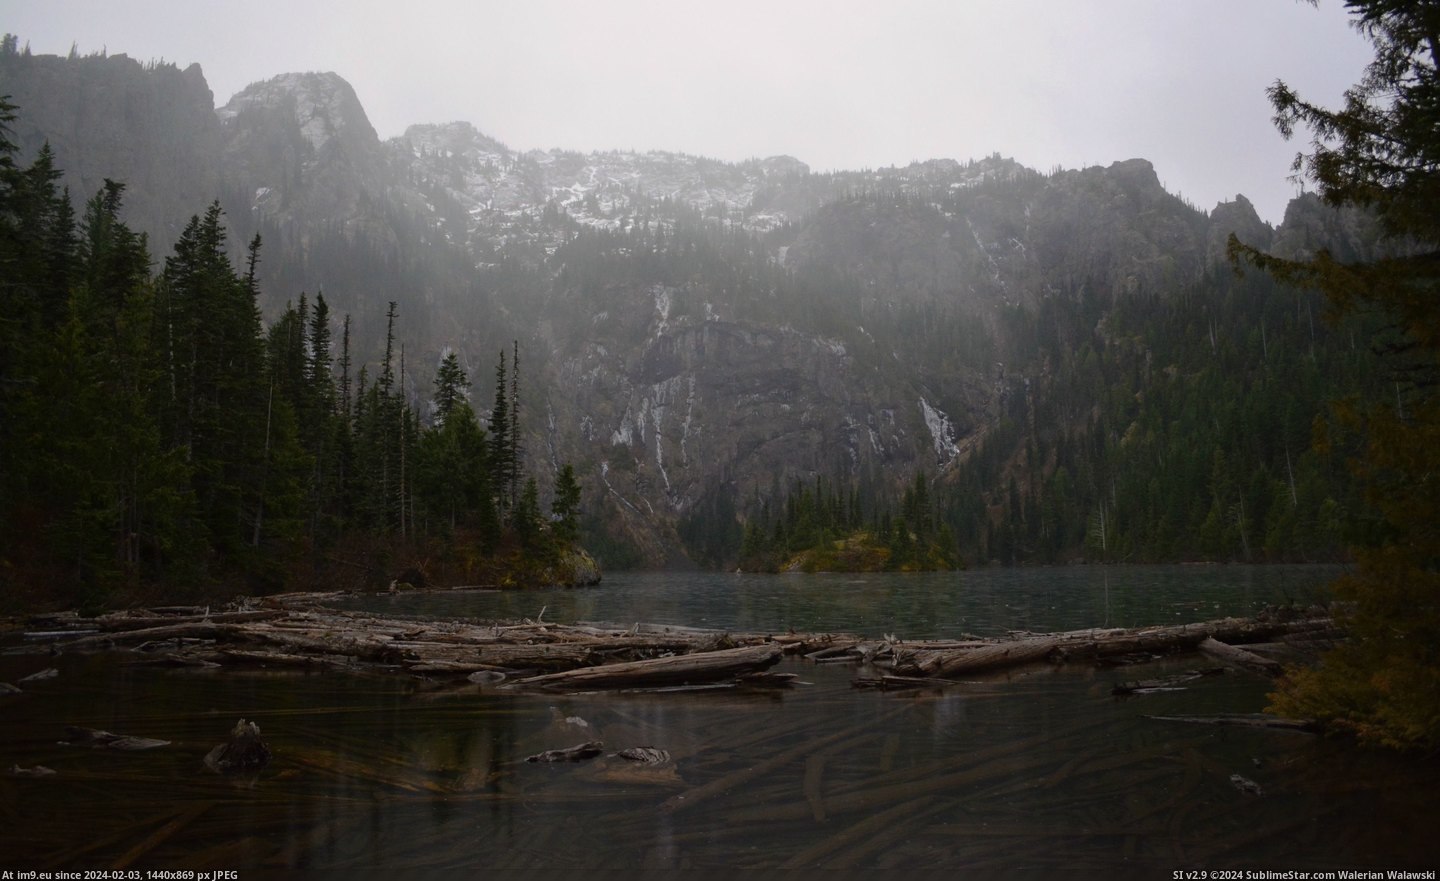 #Park #Morning #Angeles #Olympic #National #Lake [Earthporn] Lake Angeles this morning, Olympic National Park in WA.  [3600x2450] Pic. (Image of album My r/EARTHPORN favs))